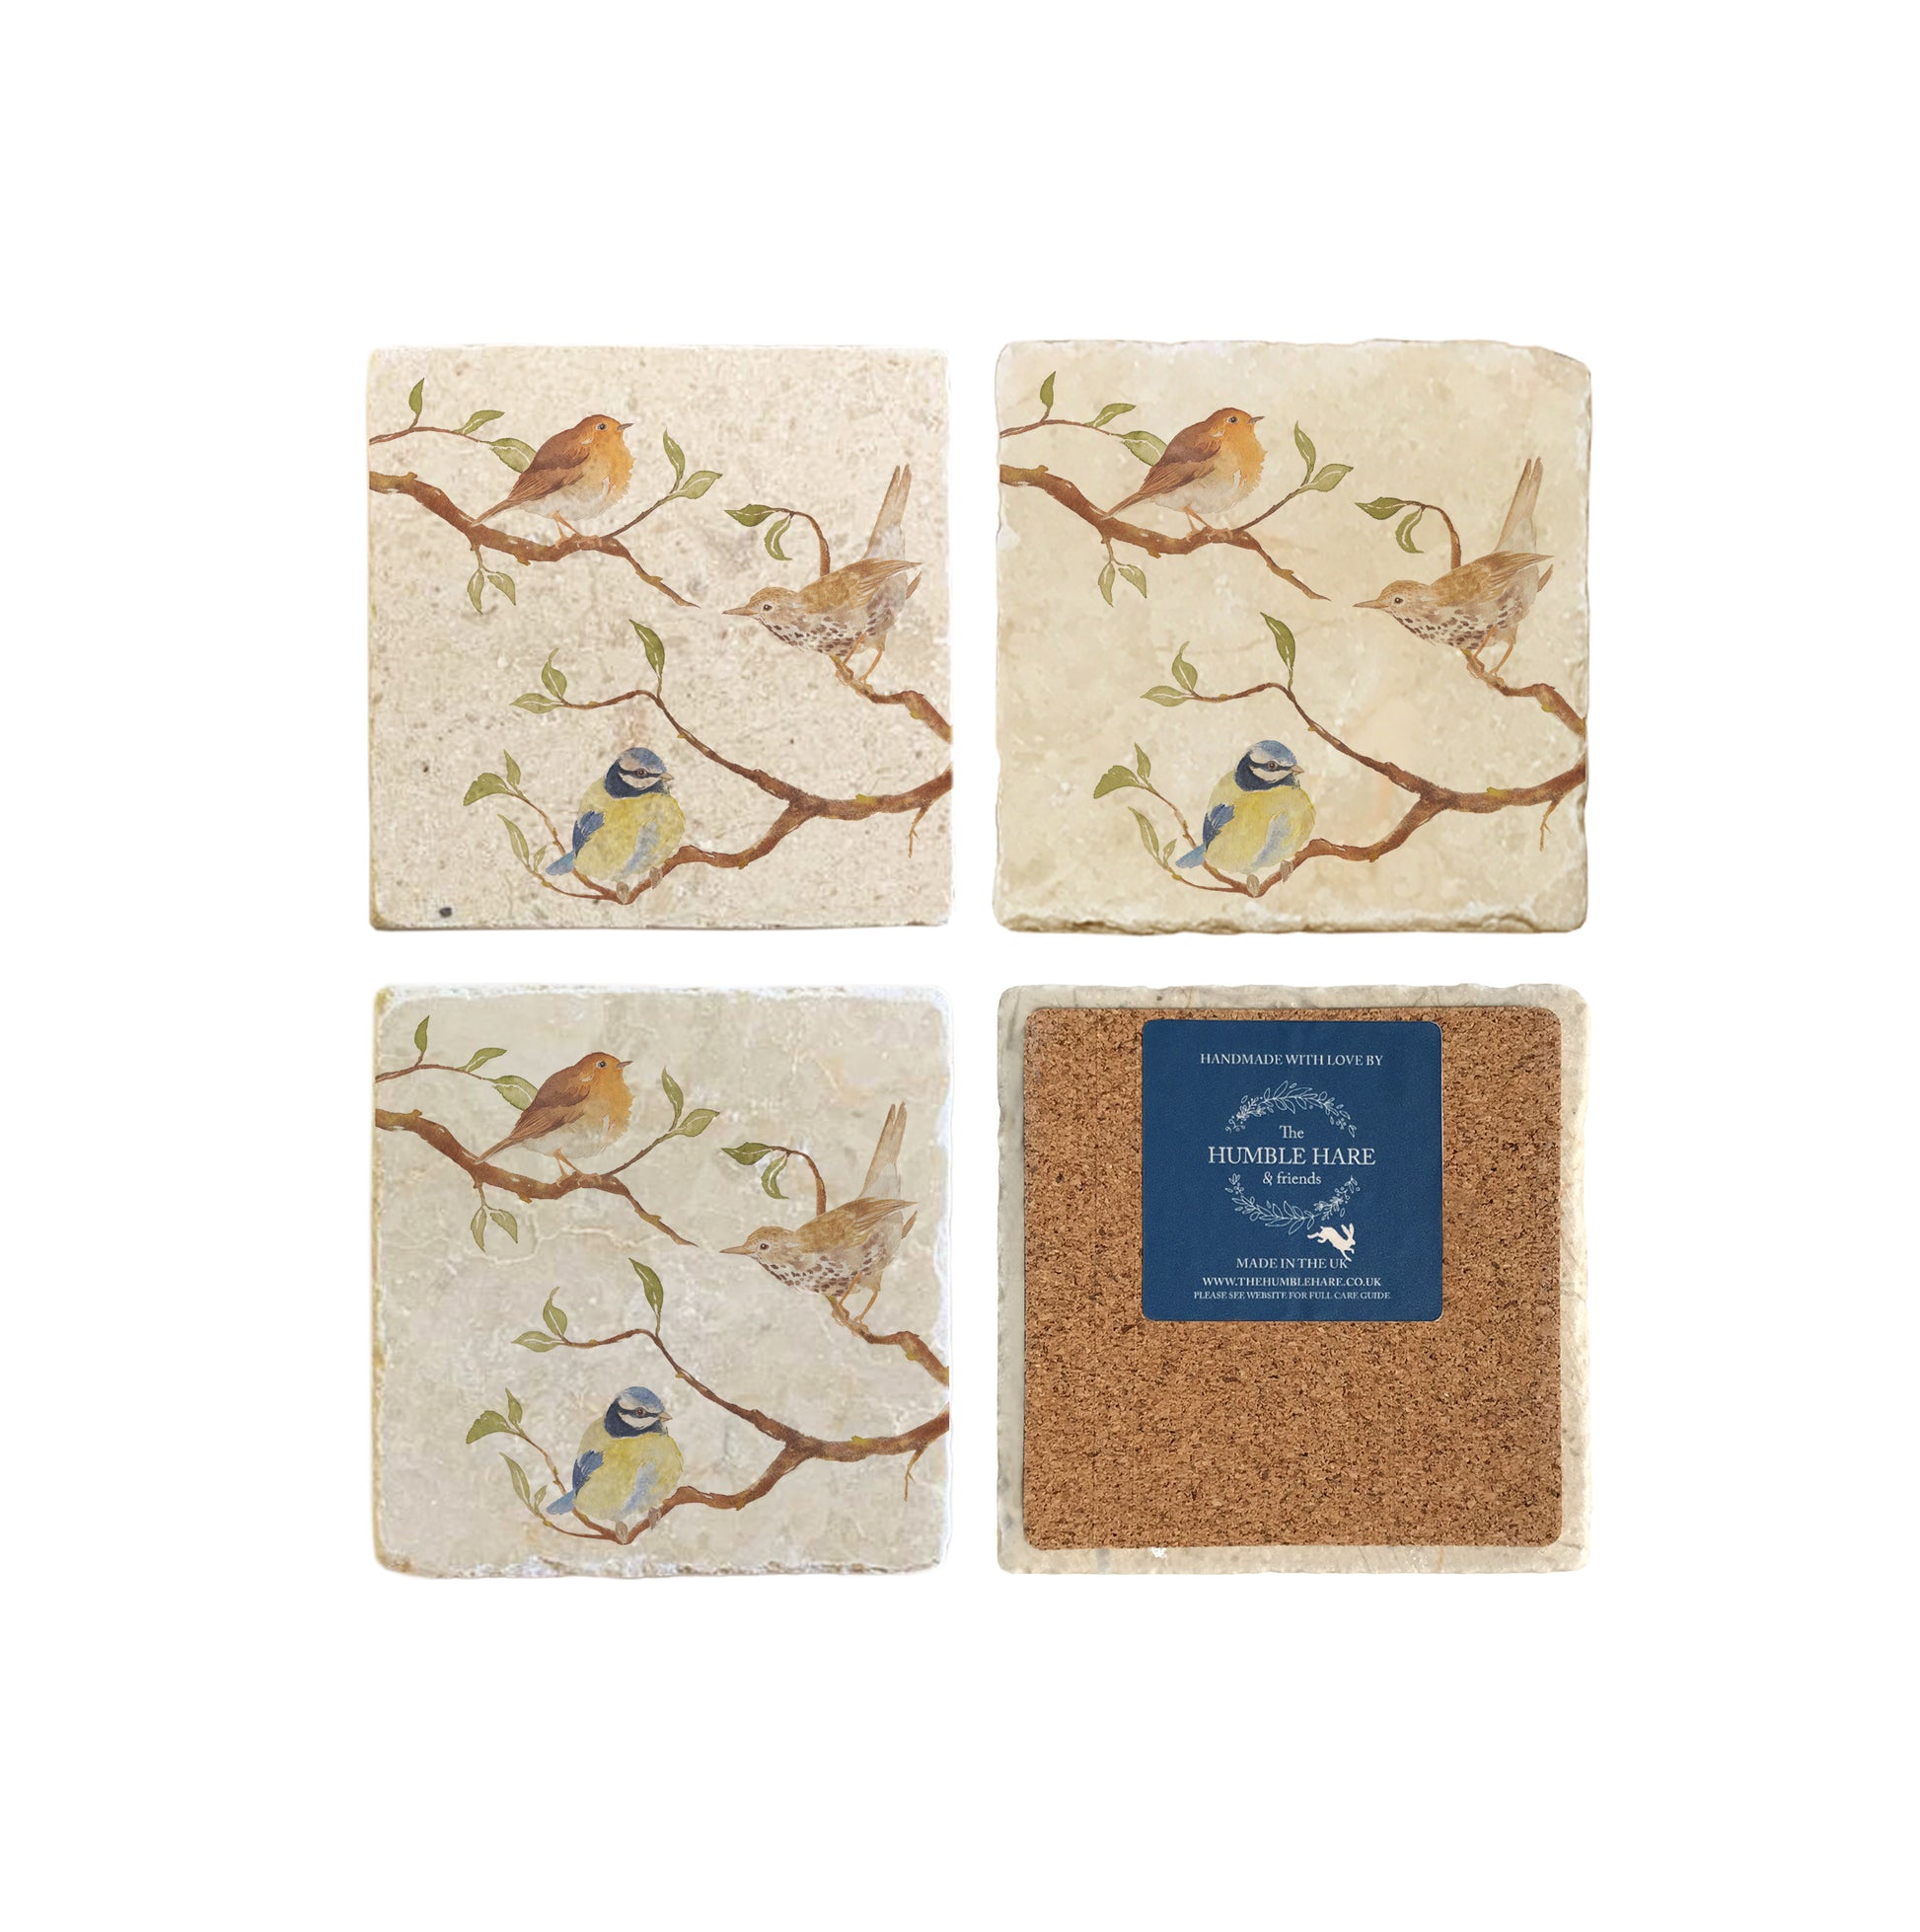 A set of 4 square marble coasters, featuring a watercolour design of British garden birds sat on branches. One coaster is flipped to show that the coasters are backed with cork.